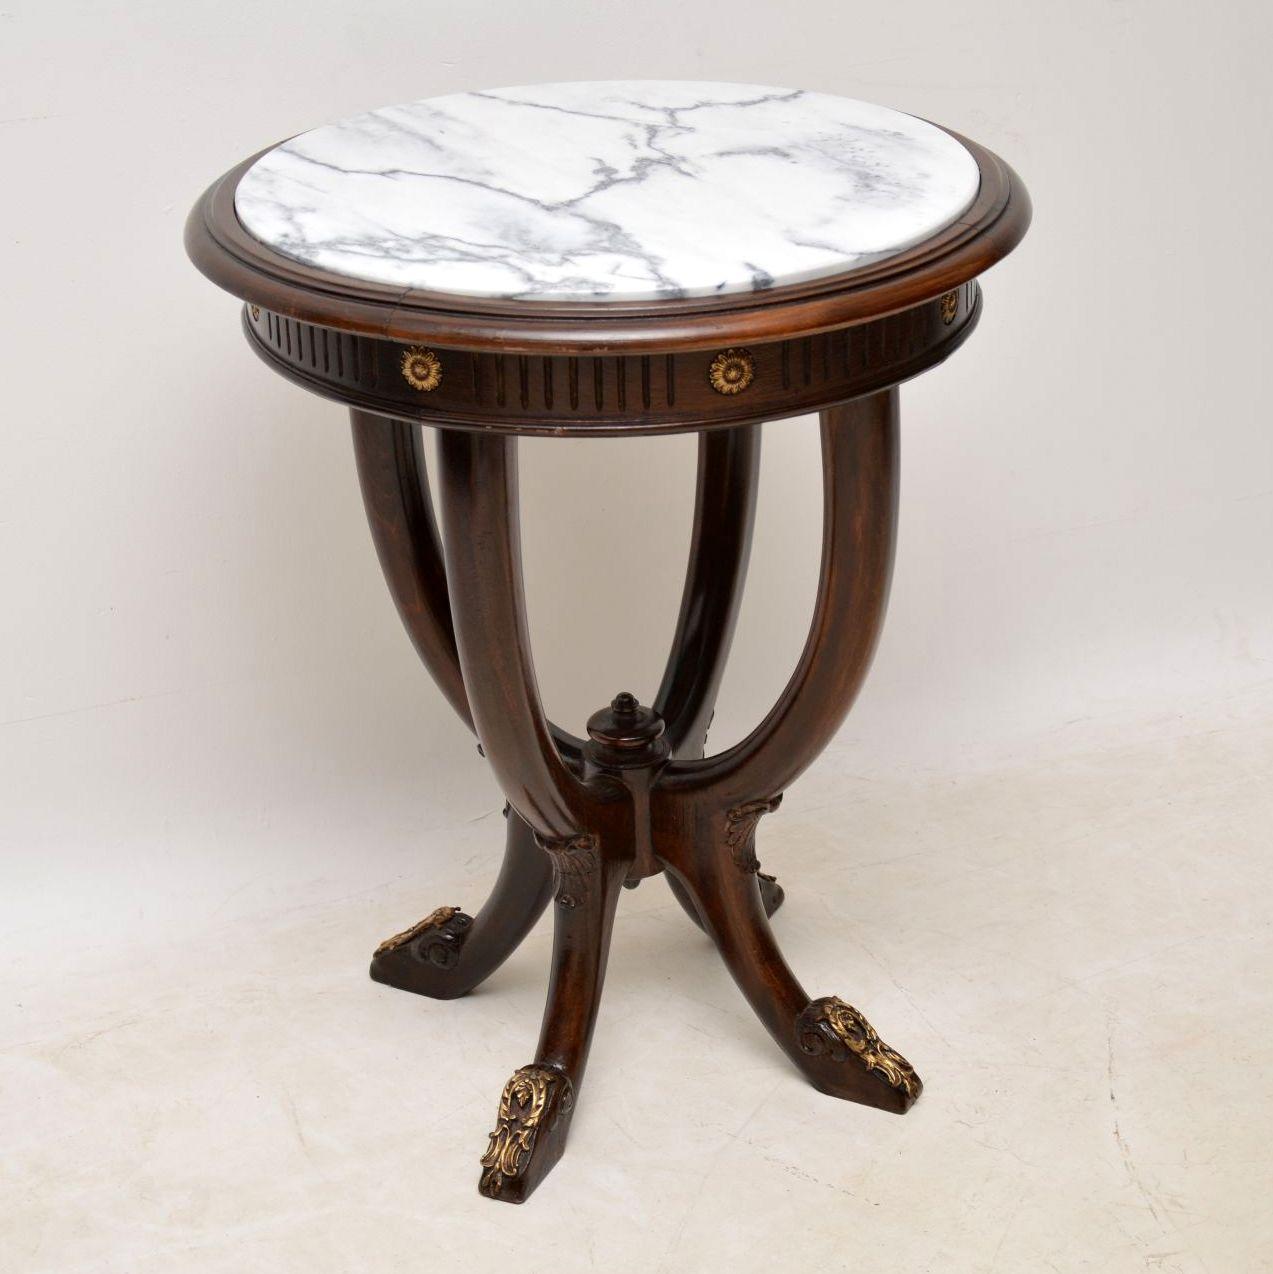 Antique marble top occasional table with original gilt metal mounts. The circular top has an inset marble and grooves around the edge, below which are four curved legs sweeping in and out. This is a very sturdy piece of furniture and is quite